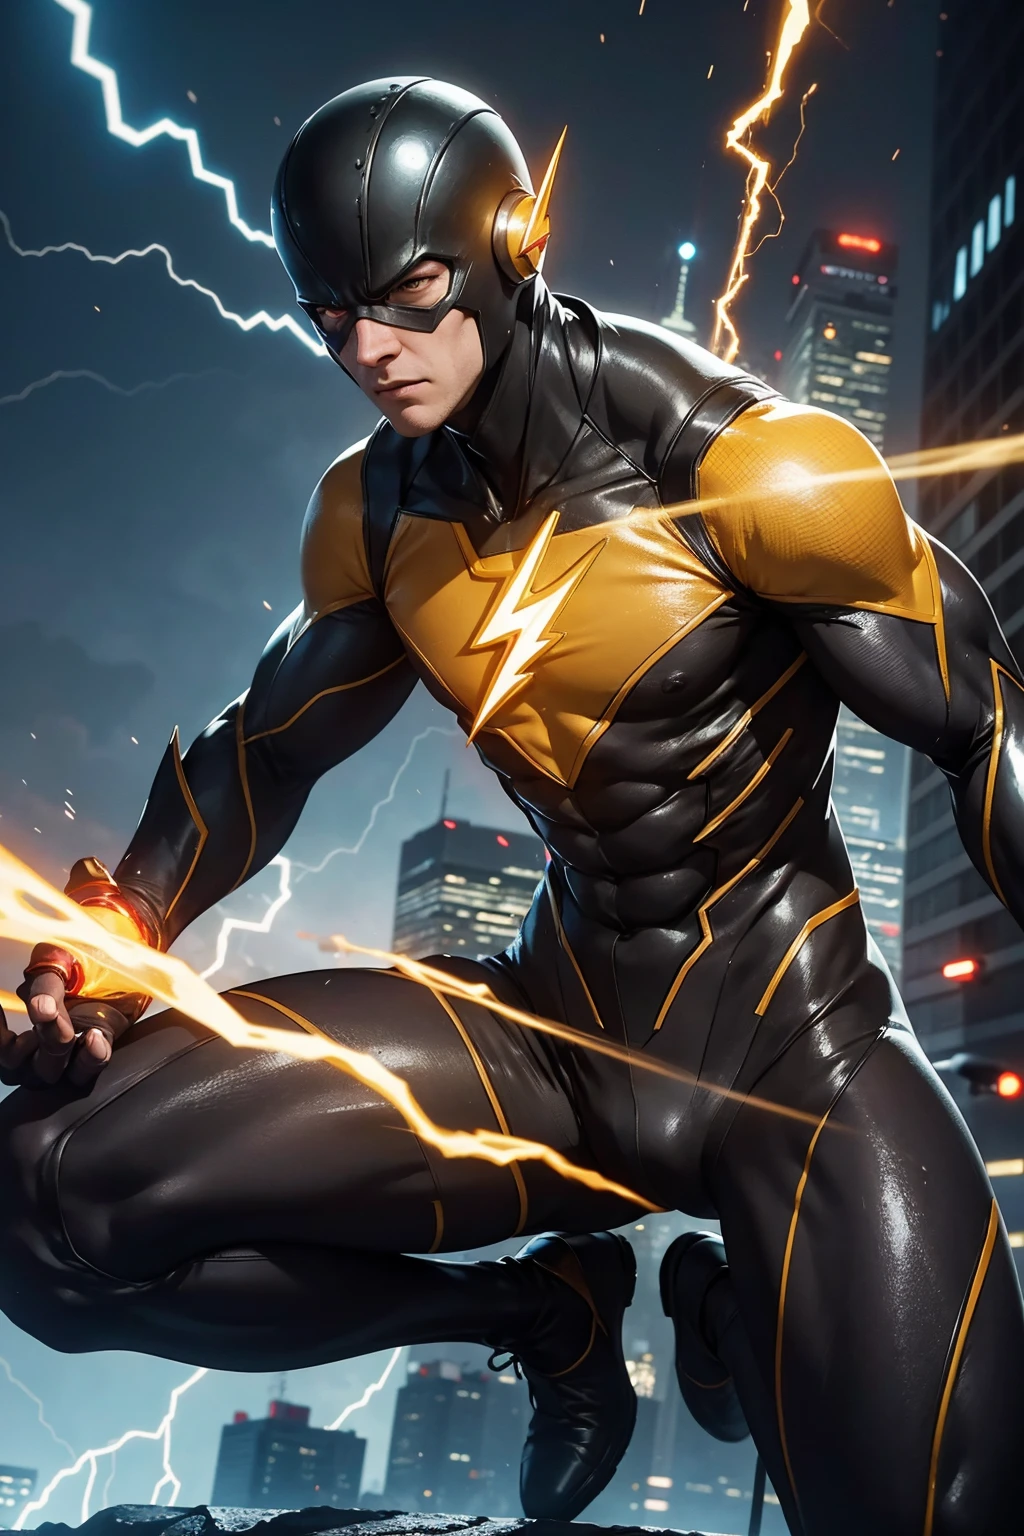 Reverse Flash stands atop a lightning-struck tower, his eyes glowing with malevolent power. His costume is a black and red blur, with a glowing yellow lightning bolt emblazoned on his chest. His hands crackle with electrical energy, ready to unleash his devastating power.

Every detail is rendered with incredible realism, from the individual strands of Reverse Flash's hair to the intricate textures of his costume. The city is a sprawling metropolis, teeming with life and neon lights. The sound design is immersive and visceral, from the crackle of electrical energy to the thunderous roar of Reverse Flash's sonic booms.

